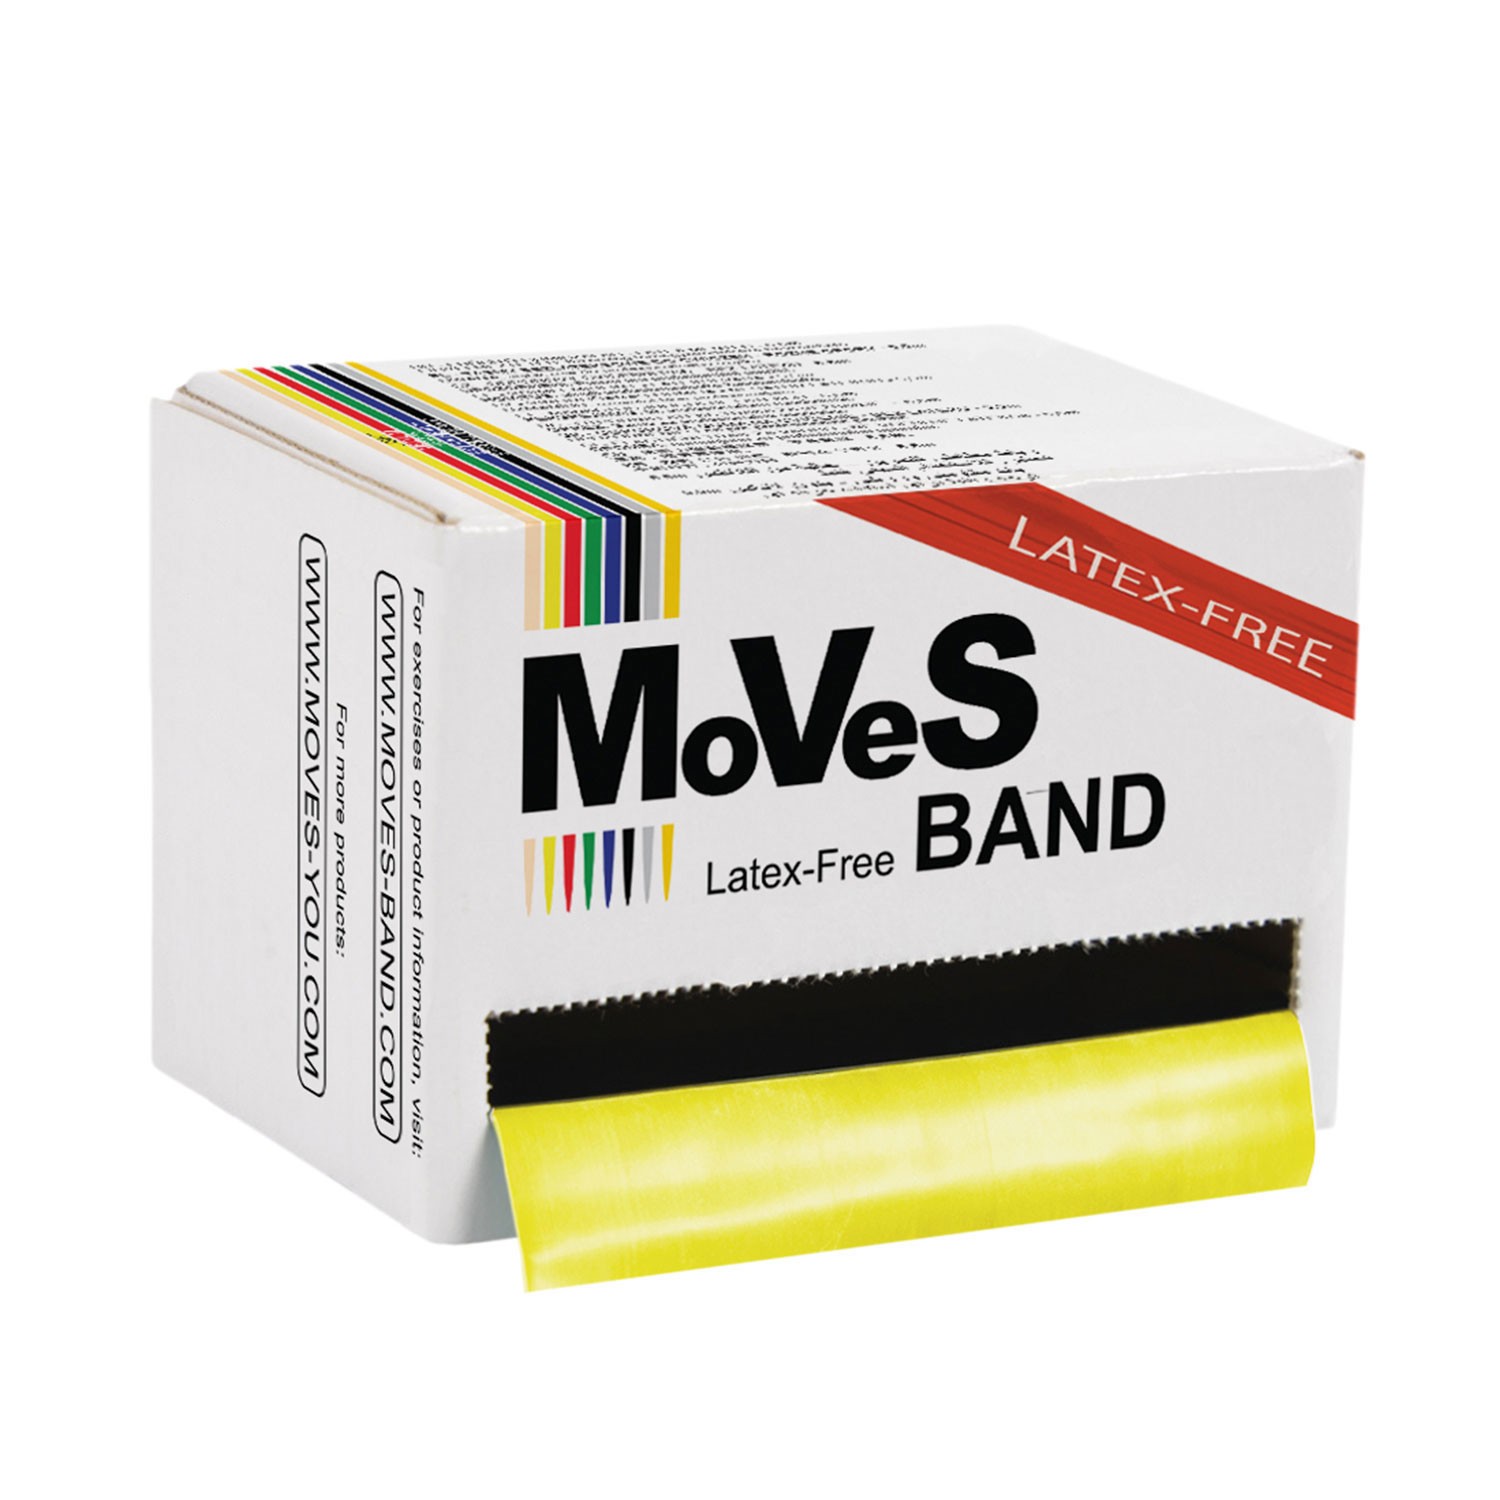 MoVeS Band LATEX-FREE, leicht - 5.5m